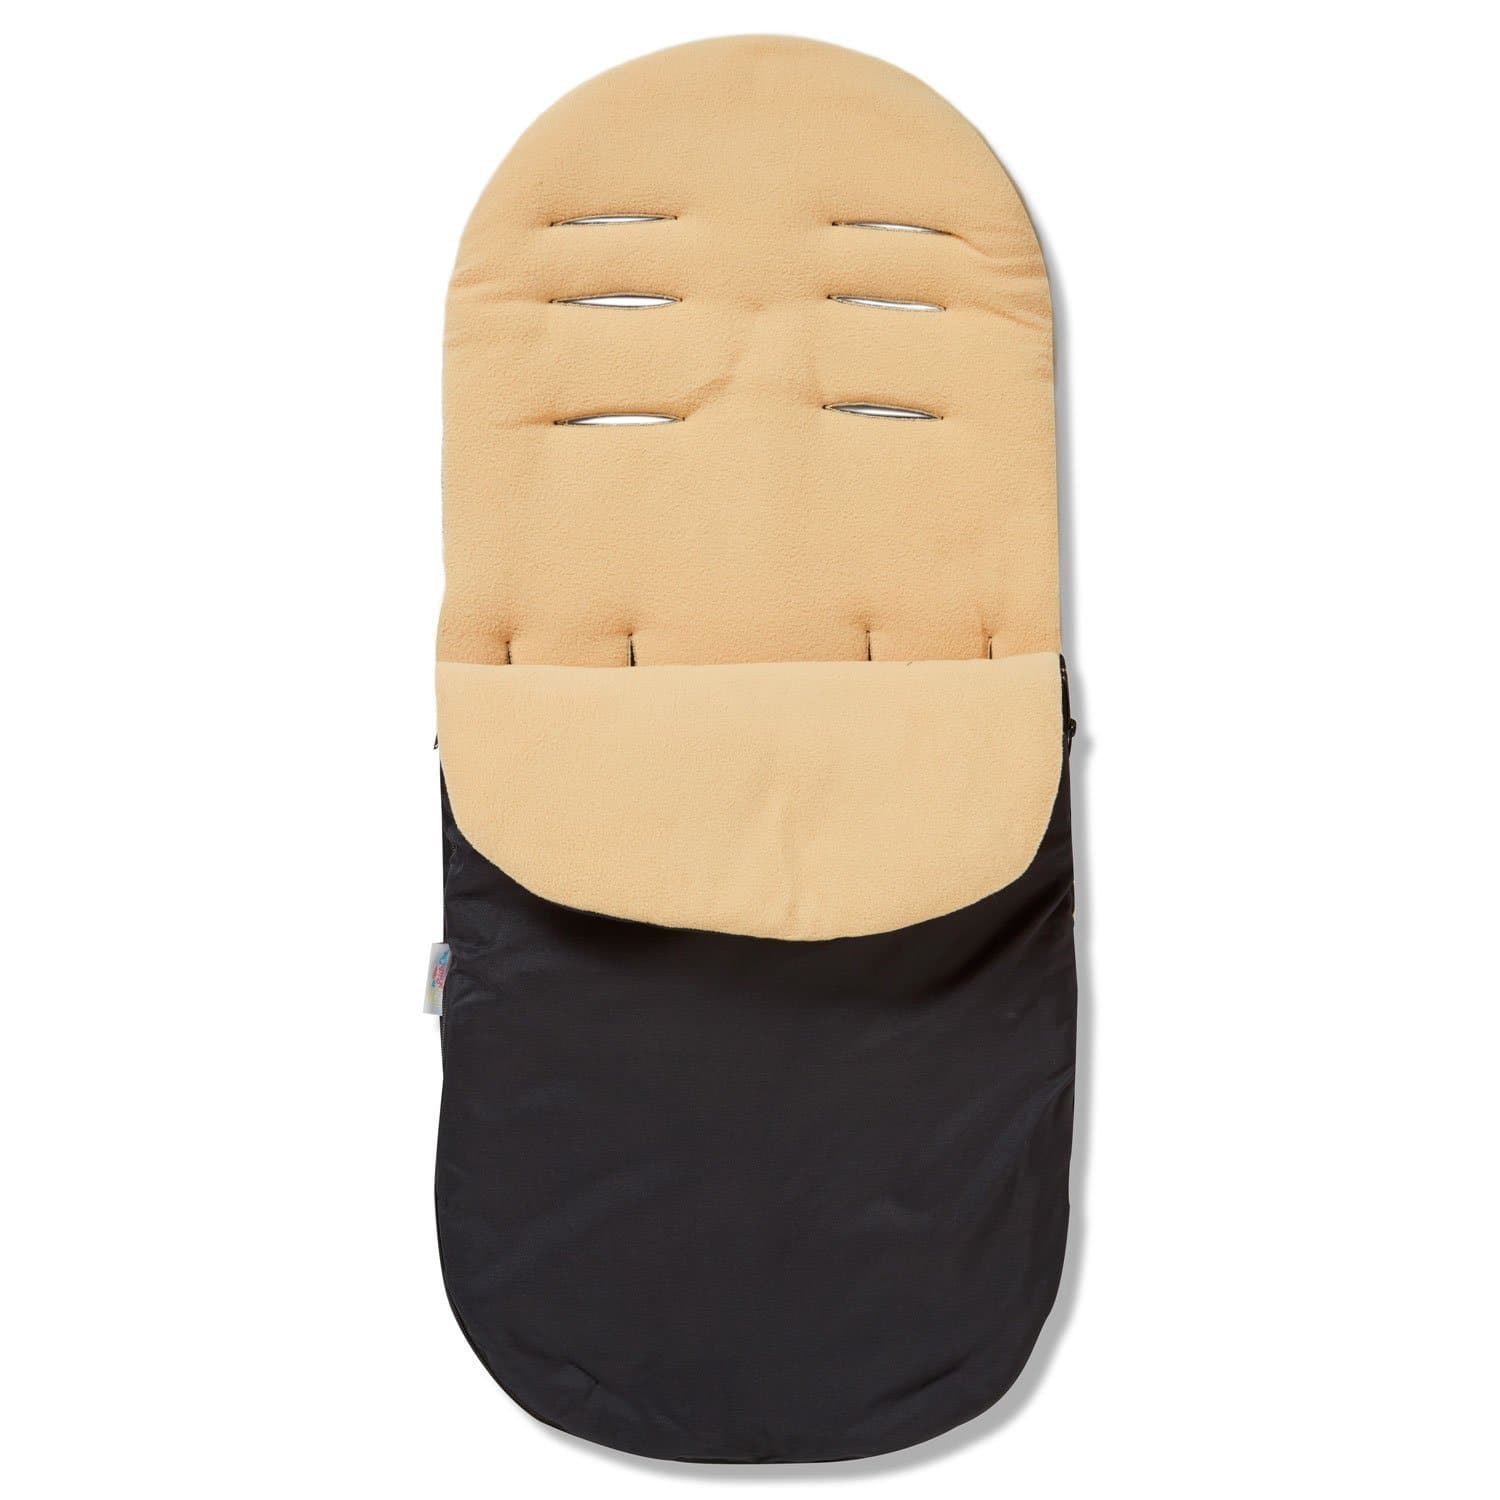 Footmuff / Cosy Toes Compatible with Mothercare - Sand / Fits All Models | For Your Little One